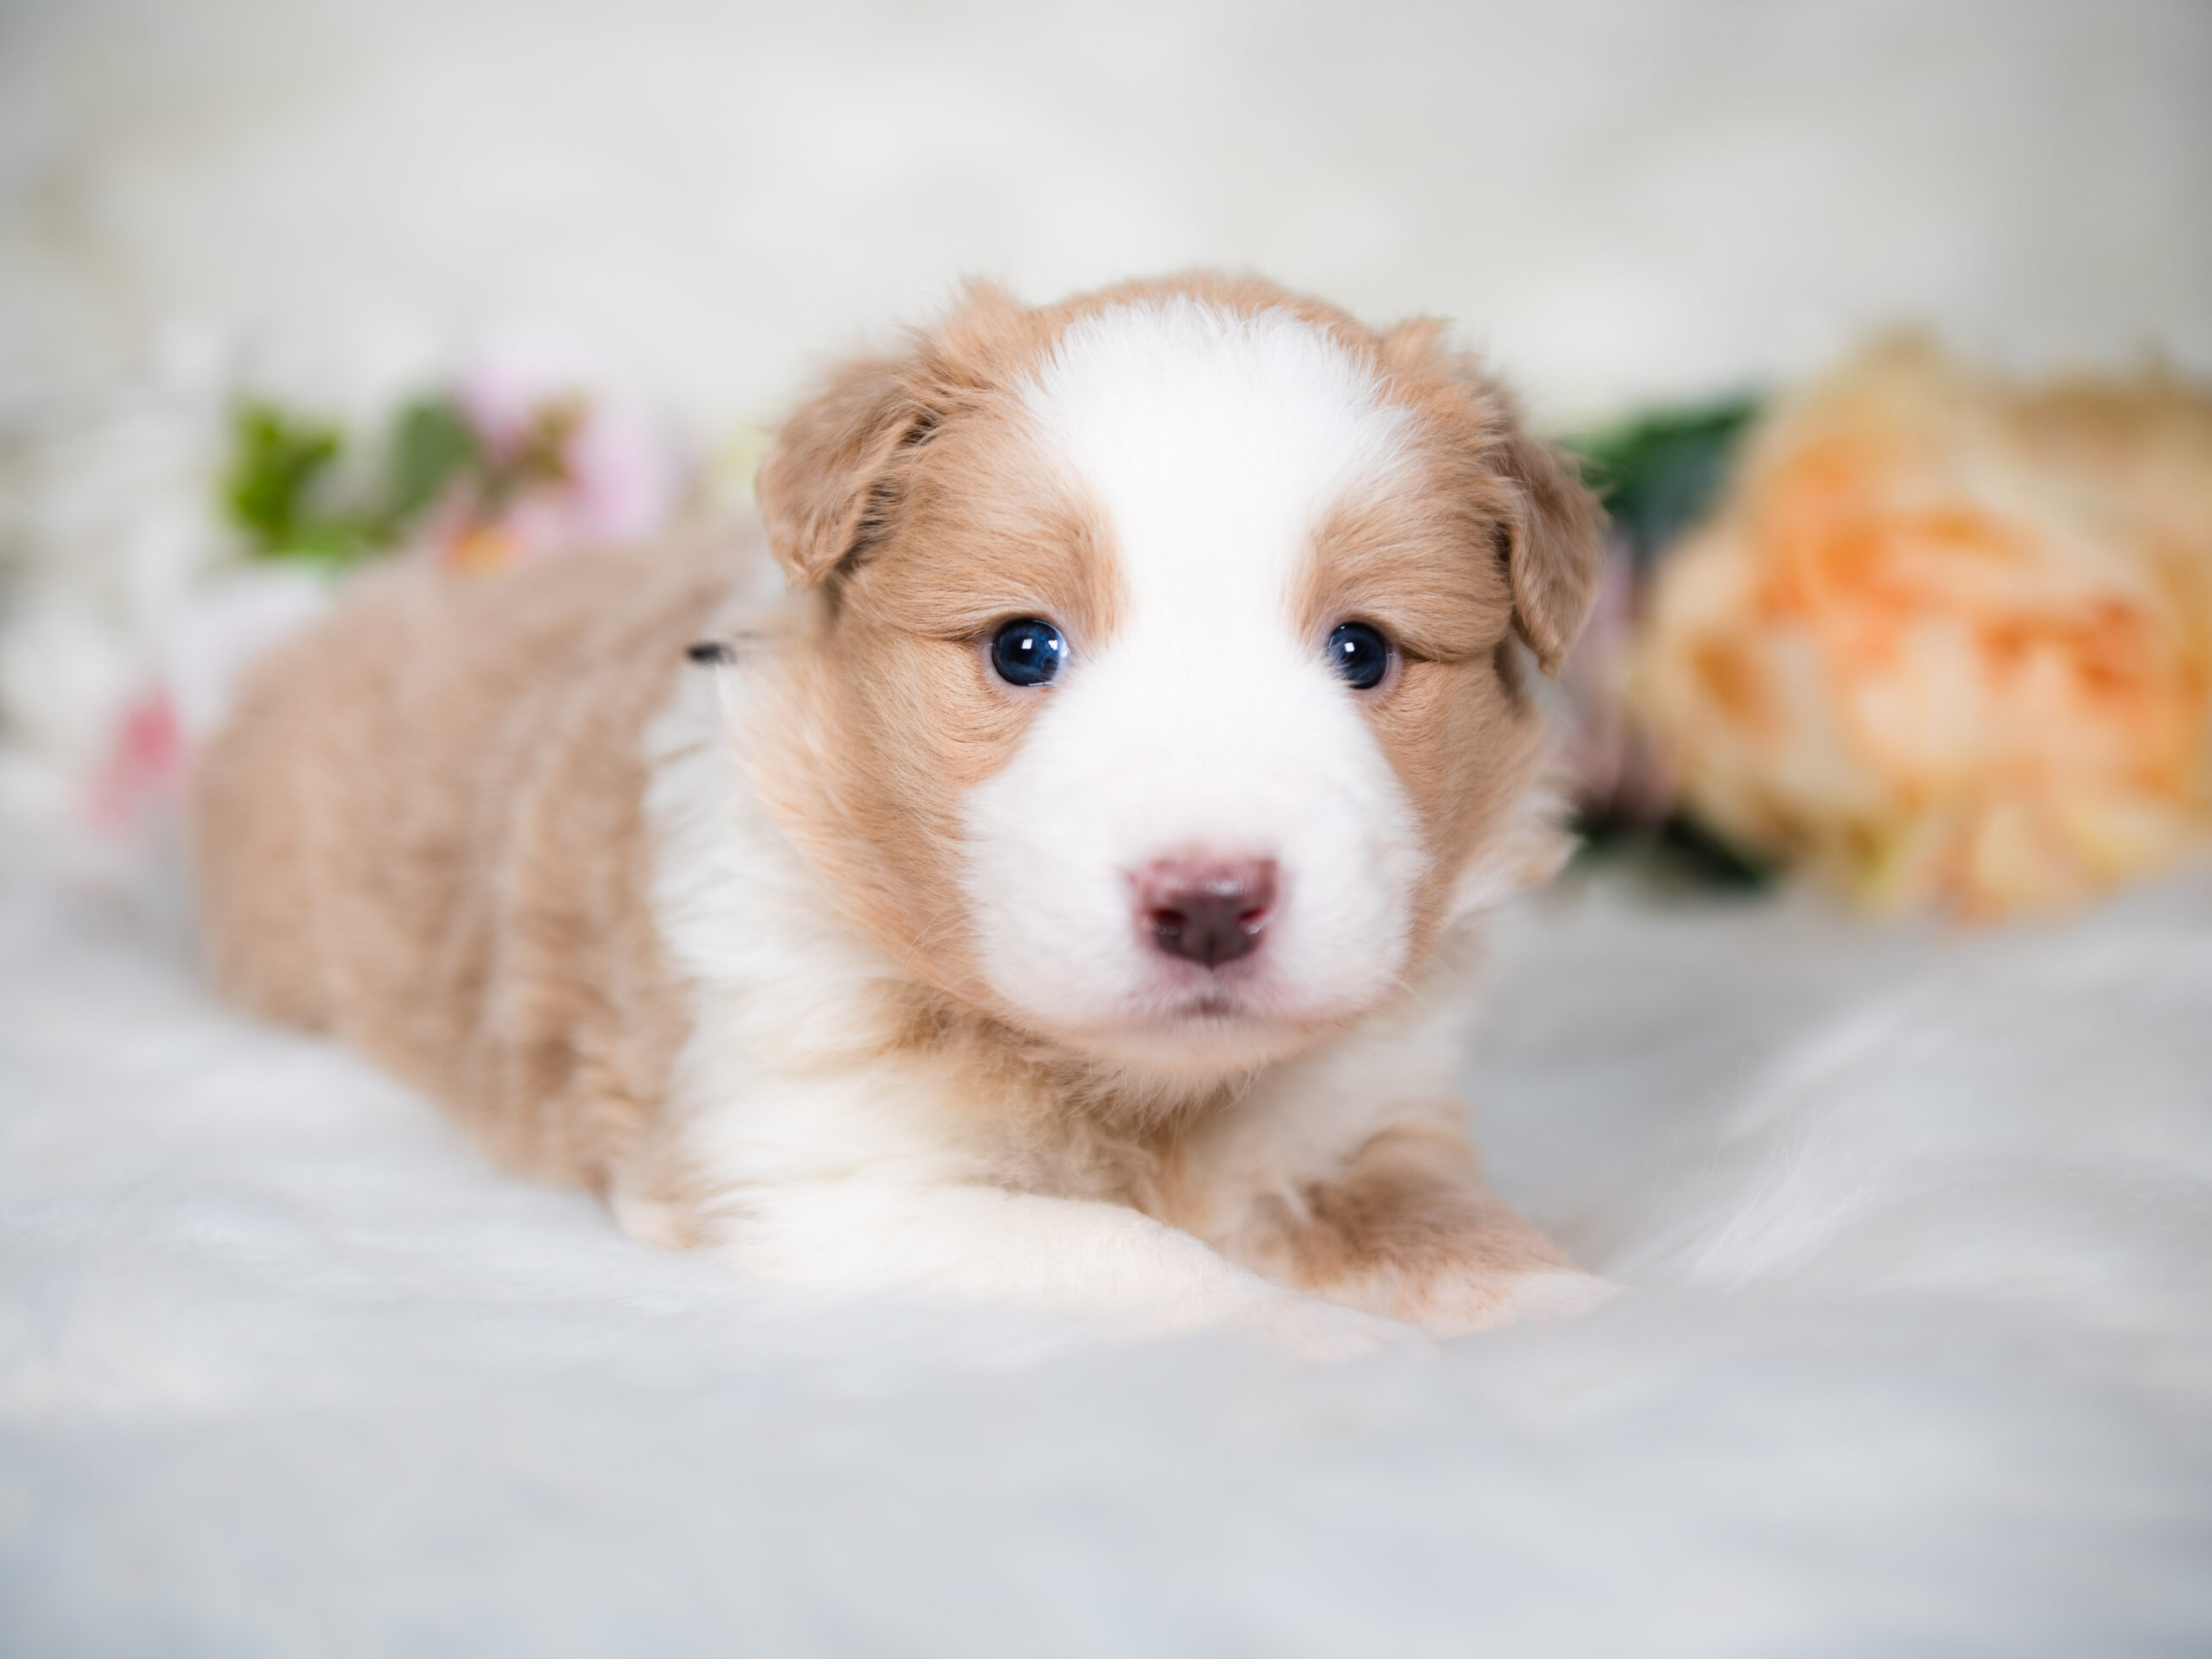 Gold & White Border Collie puppy for sale in Florida.